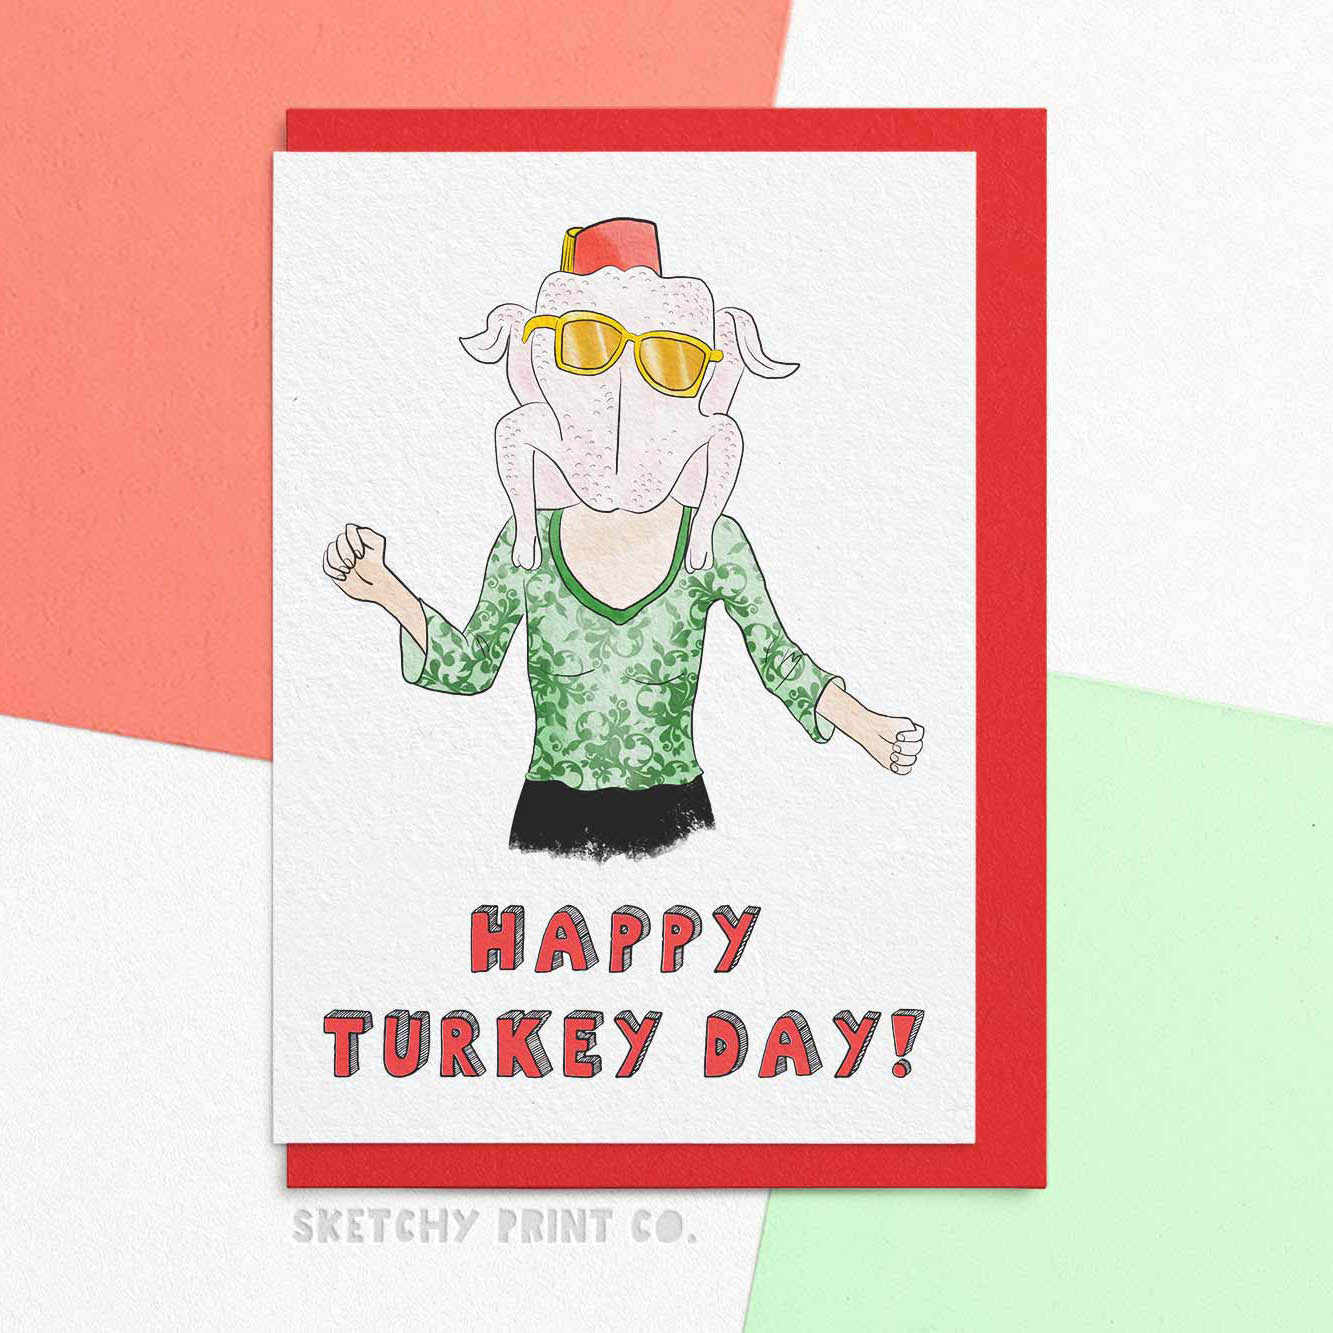 Turkey Day Thanksgiving Funny Rude Silly Christmas Cards boyfriend girlfriend unique gift unusual hilarious illustrated sketchy print co